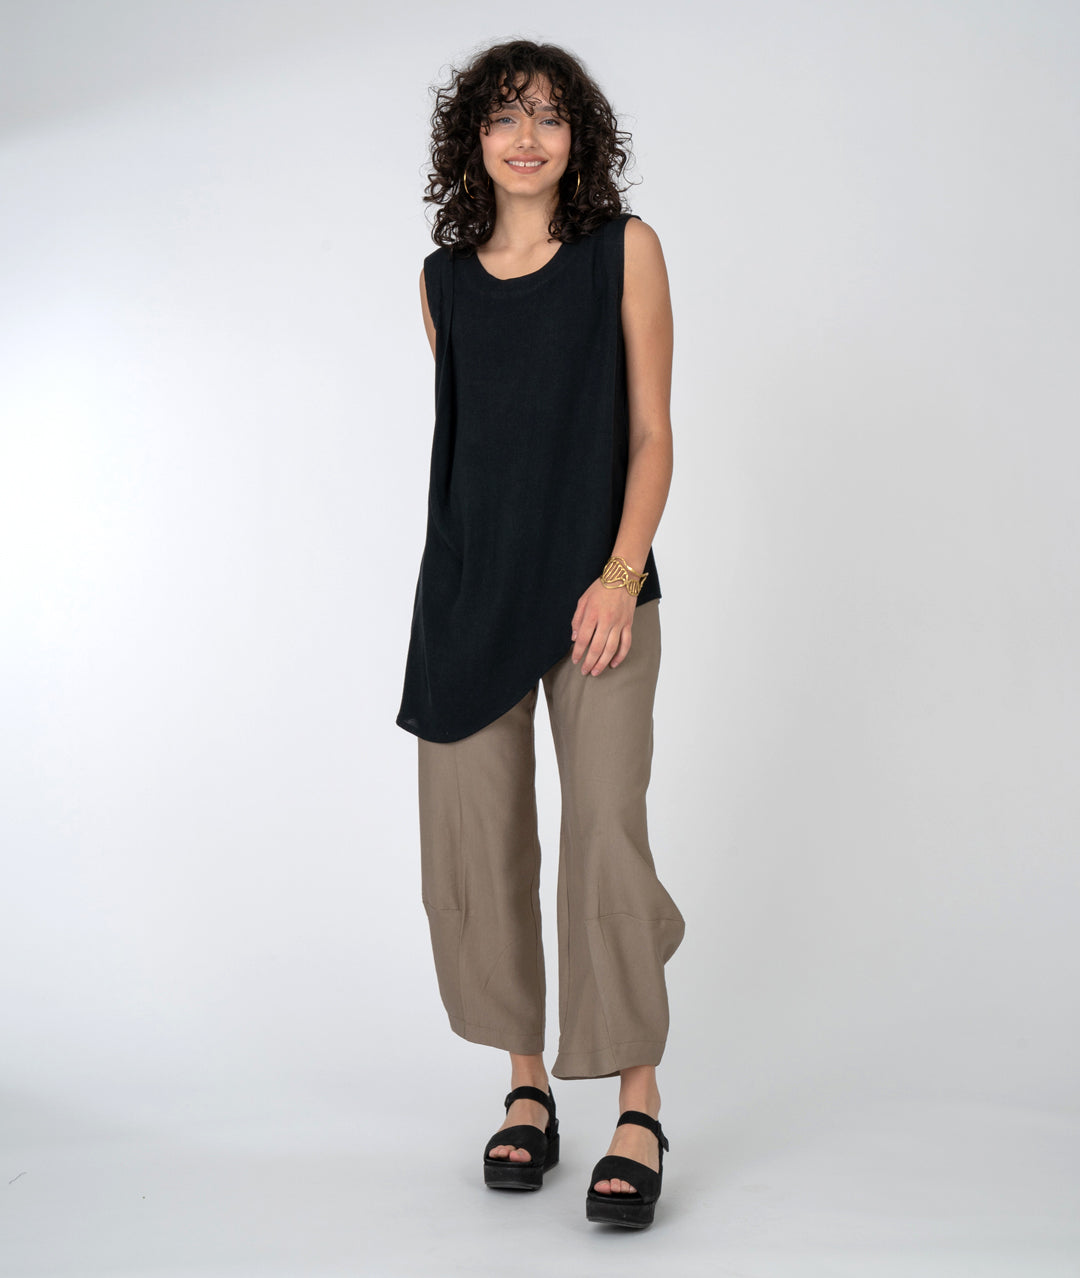 Sleeveless top with beautiful gather at one shoulder and asymmetrical hemline. Taupe pants and black platform sandals.